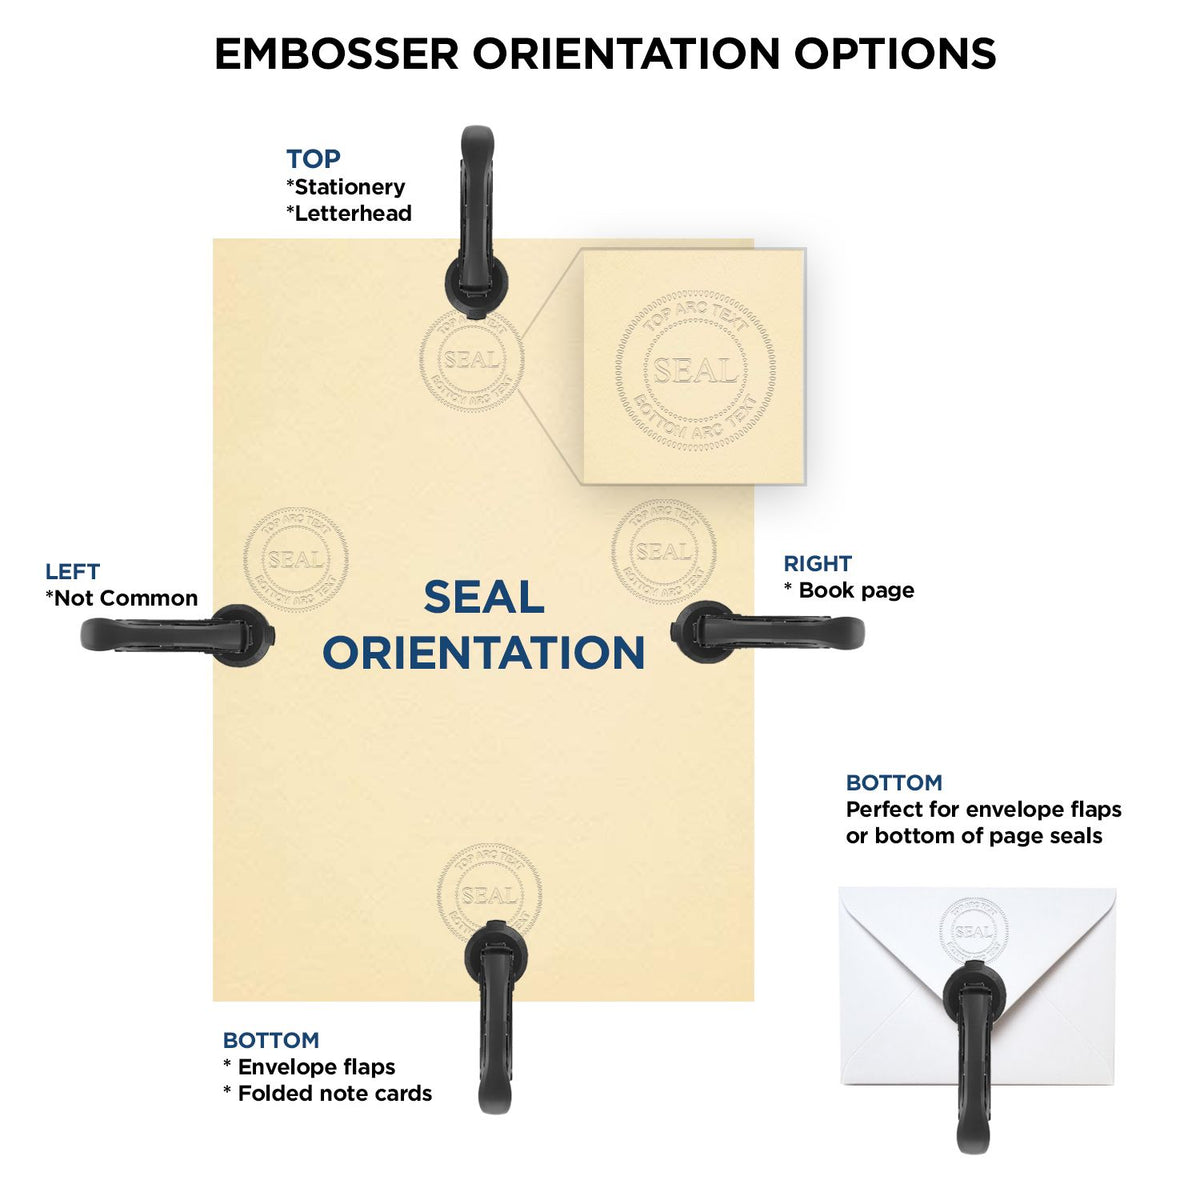 An infographic for the Gift Maine Engineer Seal showing embosser orientation, this is showing examples of a top, bottom, right and left insert.